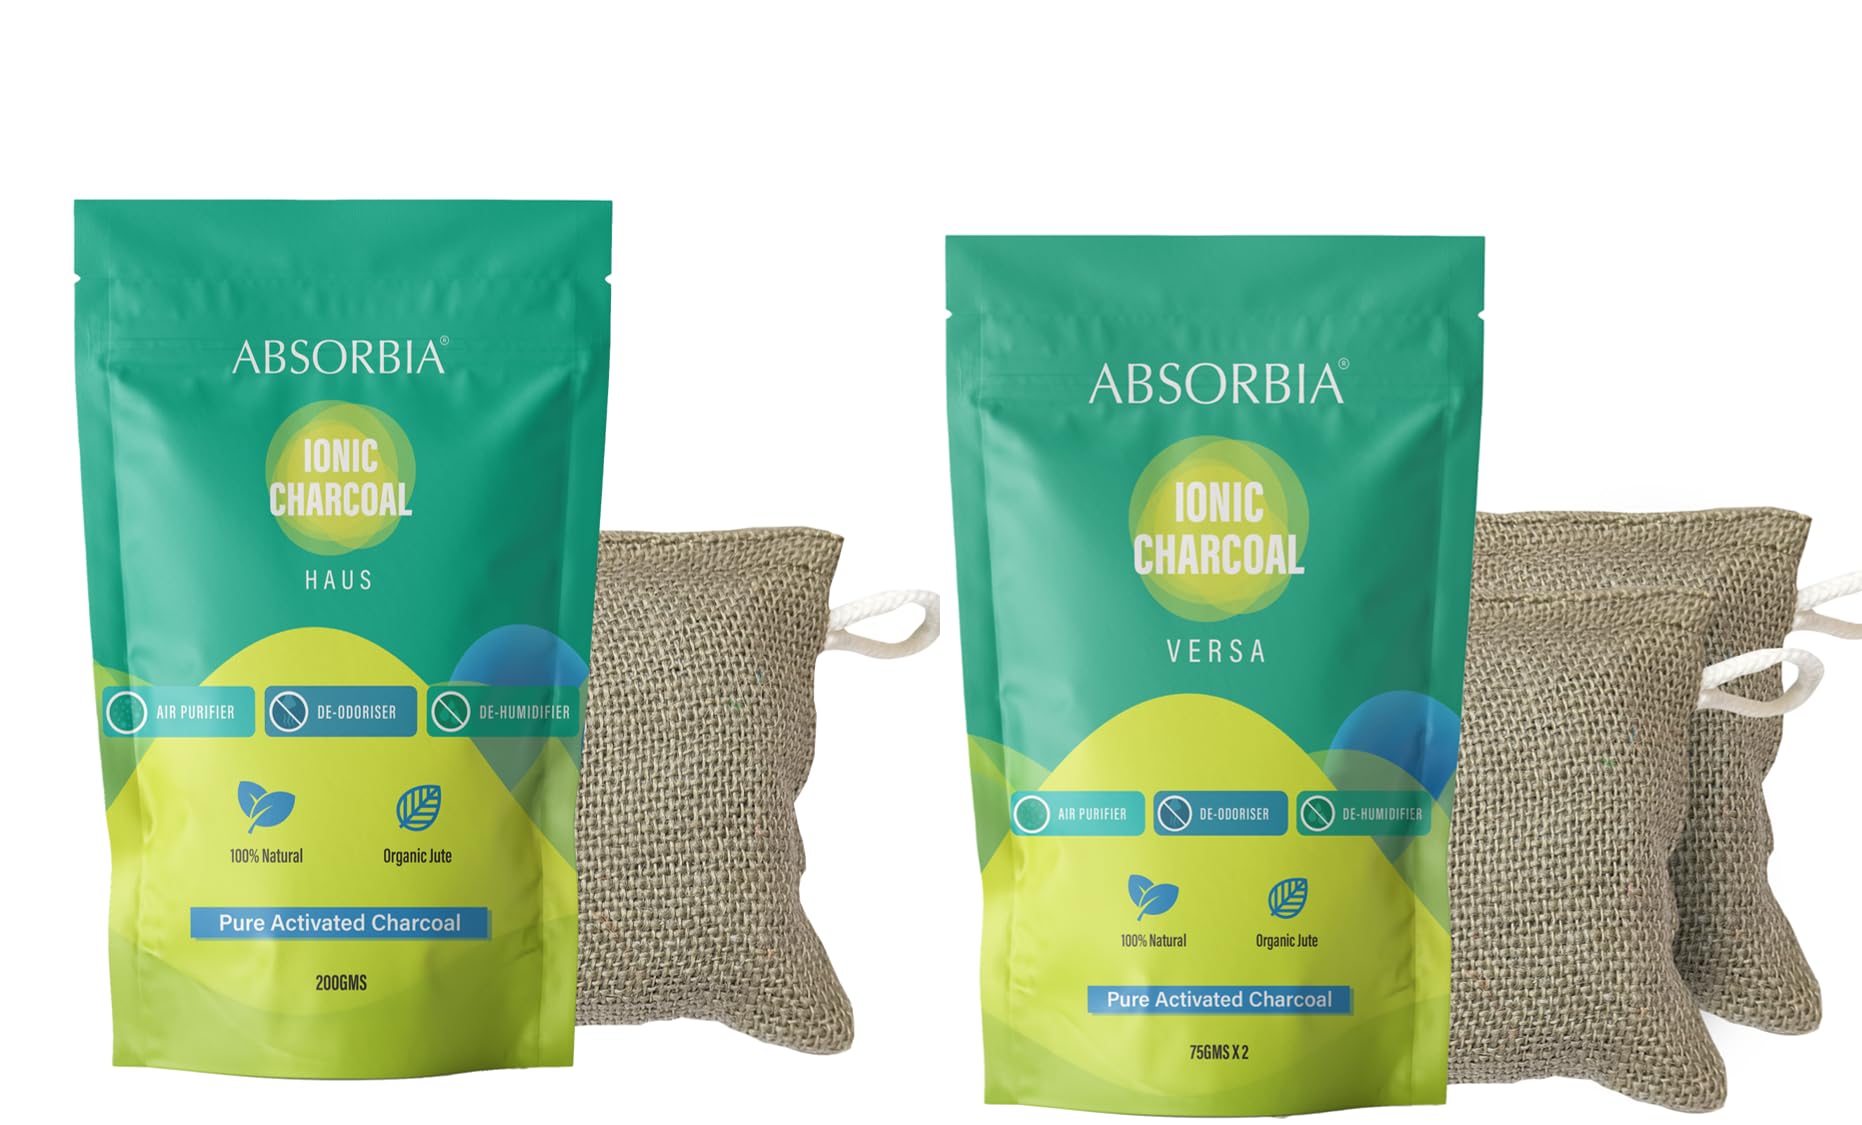 Absorbia Charcoal Bag (75gx2) & ABSORBIA IONIC HAUS Pure Activated Charcoal Air Purifyer, made with Organic Jute Bag |Natural Deodorizer and Dehumidifier for Car Rooms Fridge Shoes etc 200 Gms…